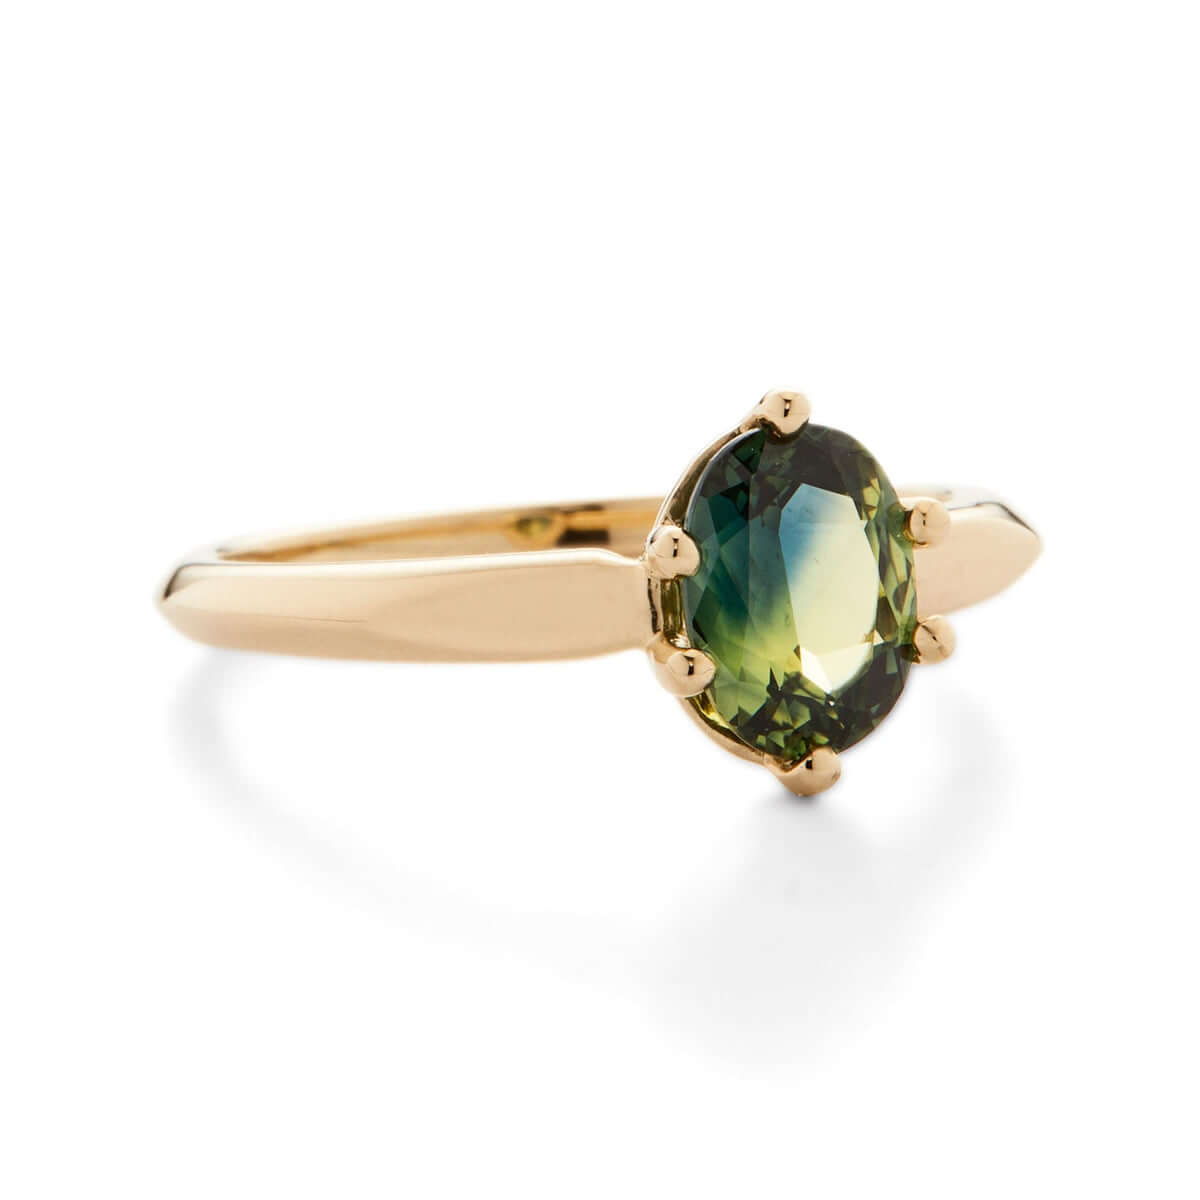 A top-down view of a yellow gold ring showcasing an oval green Australian sapphire.